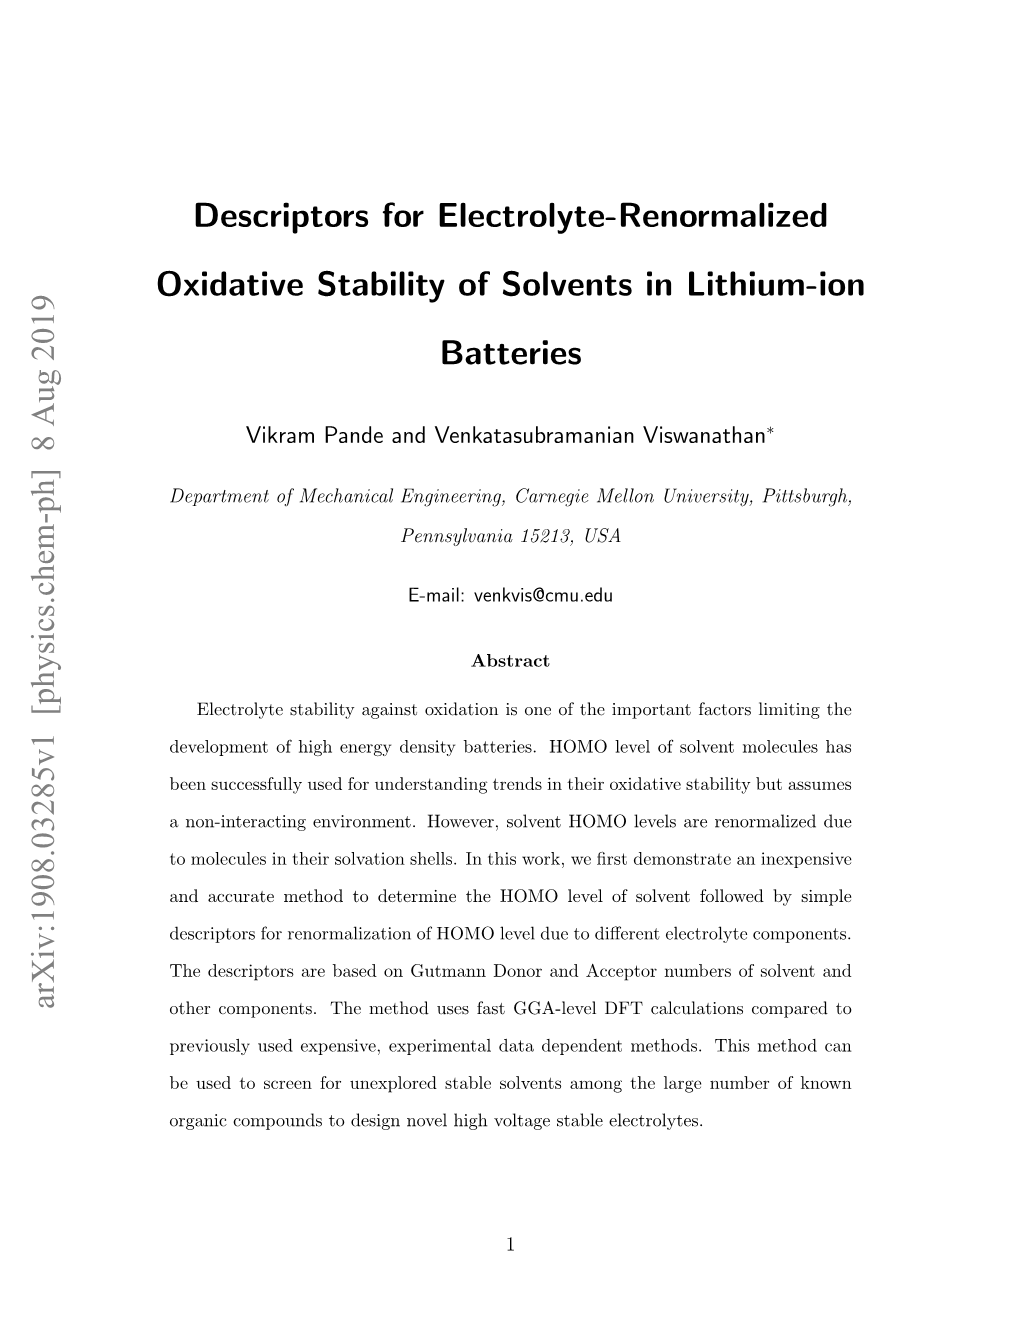 Descriptors for Electrolyte-Renormalized Oxidative Stability of Solvents in Lithium-Ion Batteries